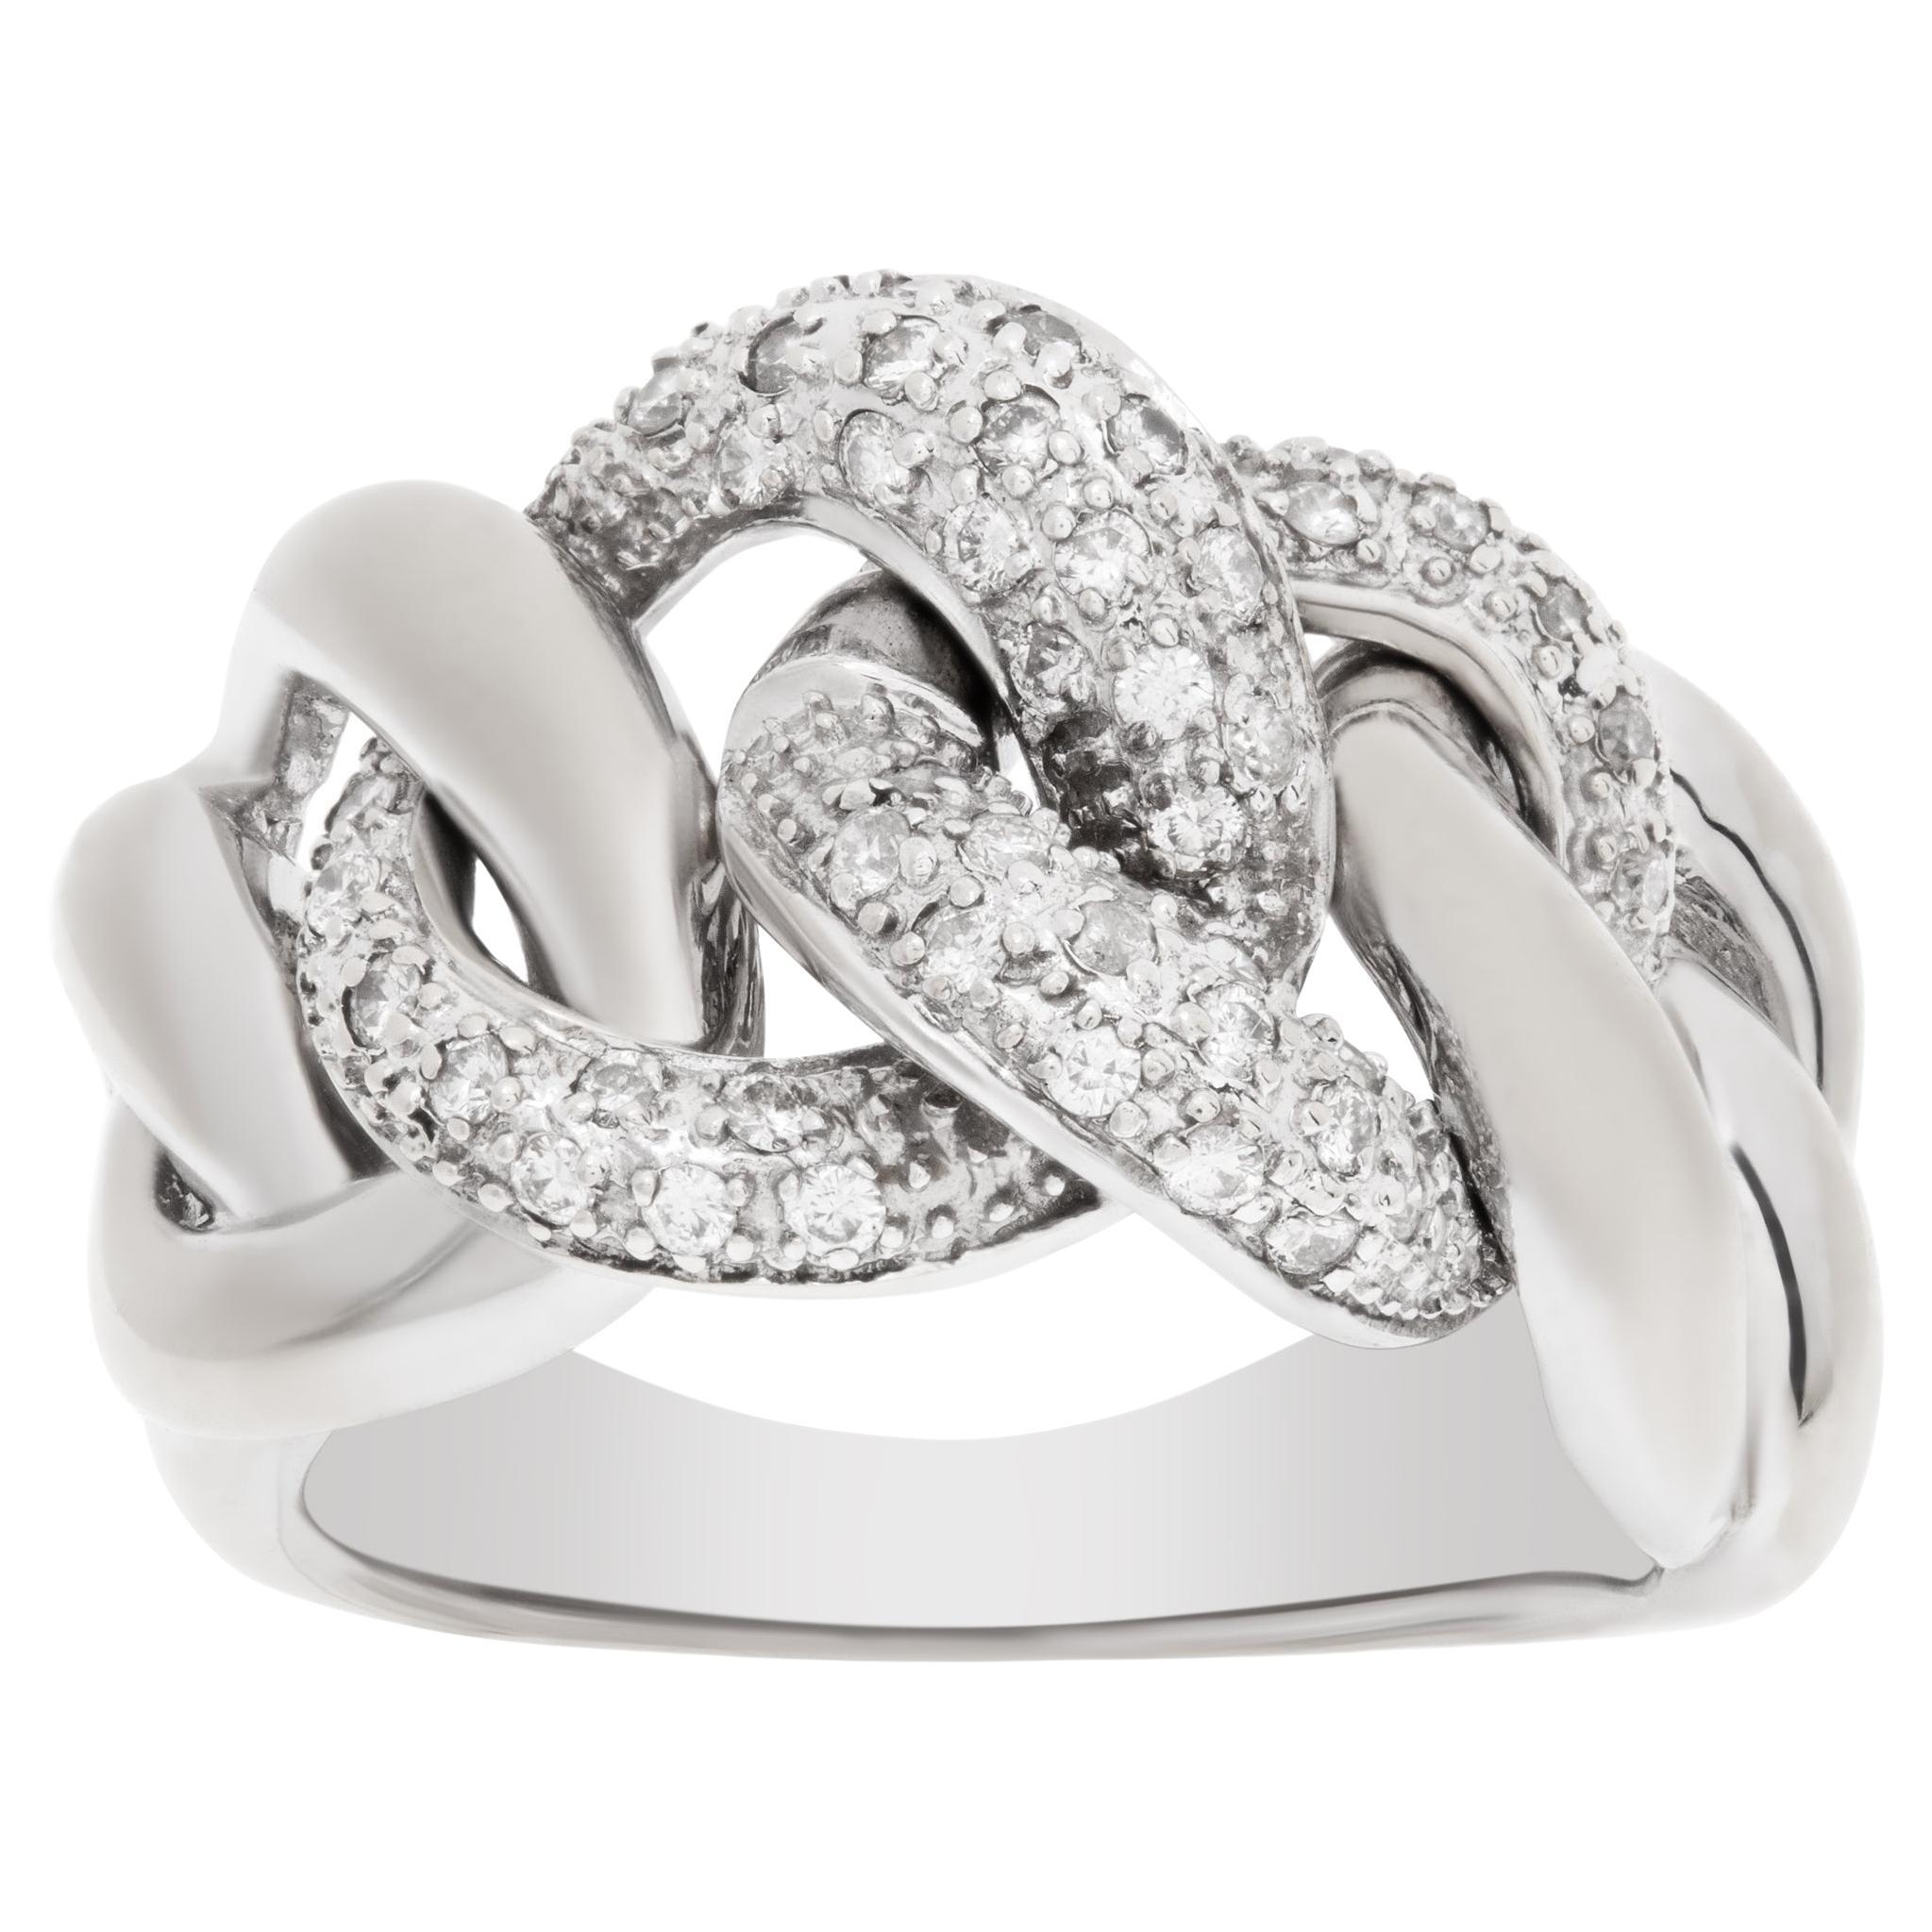 Pave Diamond link ring in 14k white gold. 0.50 carats in diamonds. 